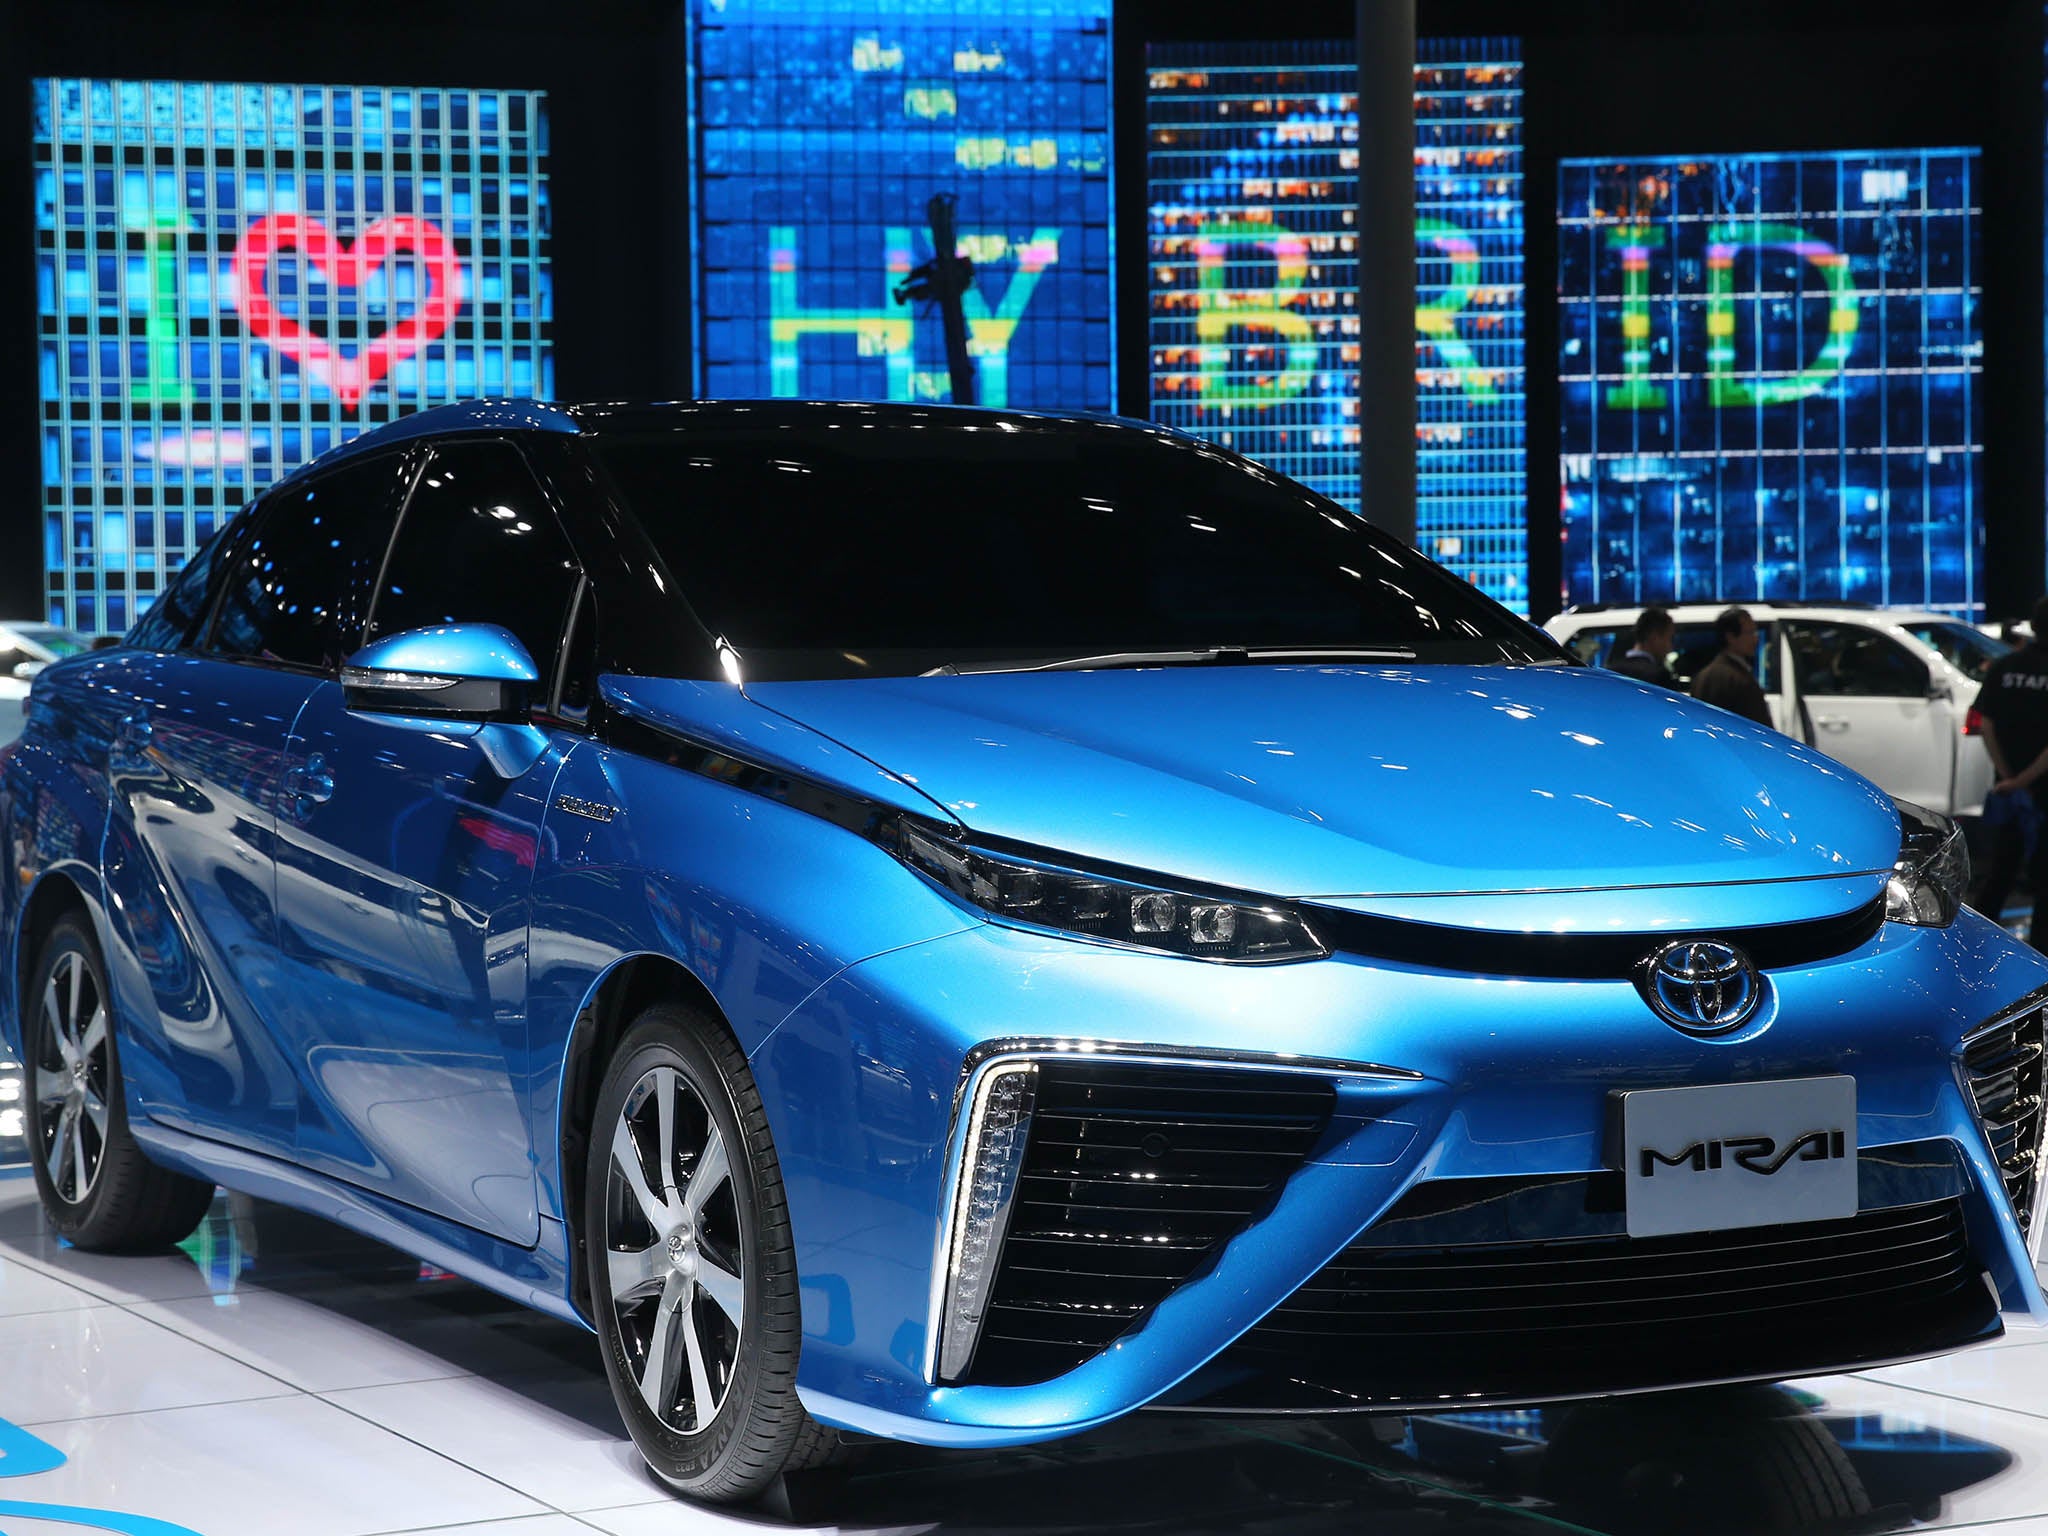 The Toyota Mirai, billed as the world’s first fuel cell vehicle for the mass market